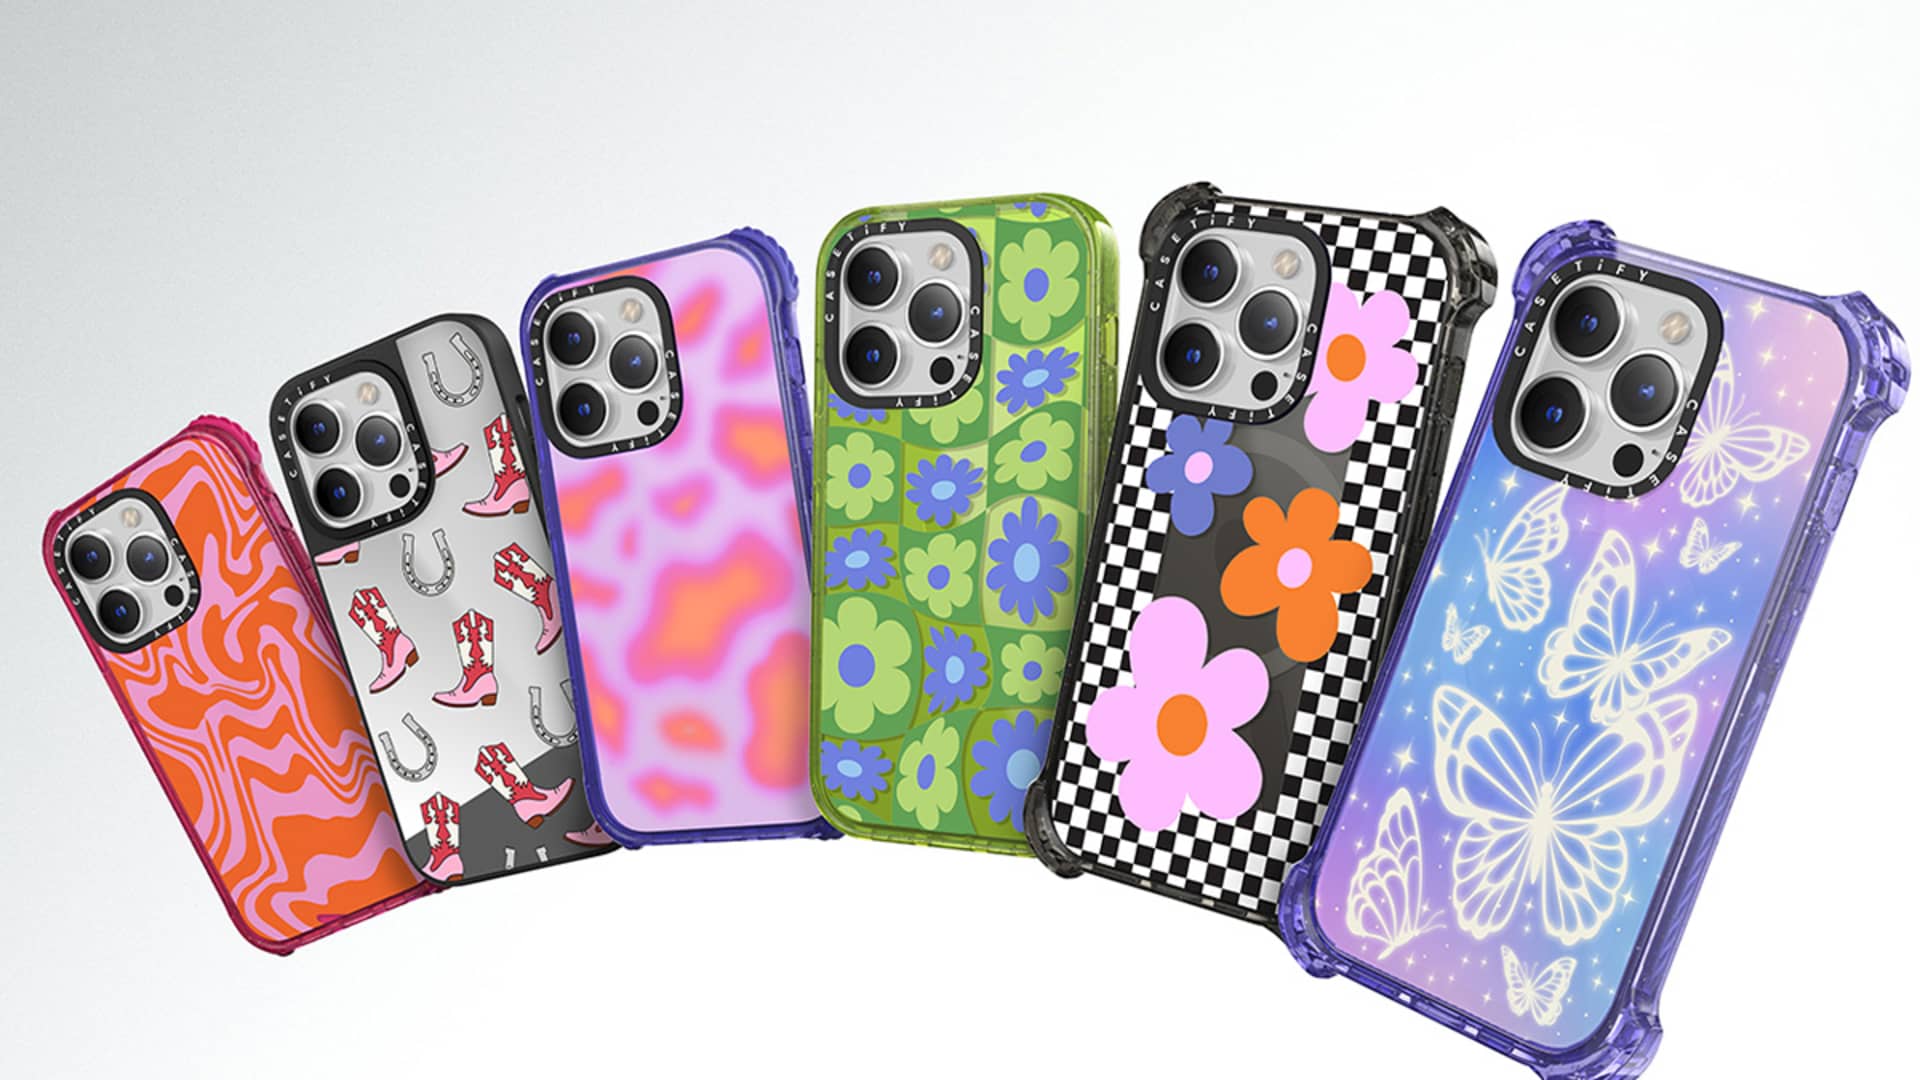 Casetify was first started selling customizable phone cases, but it has since expanded to collaborations with global artists.